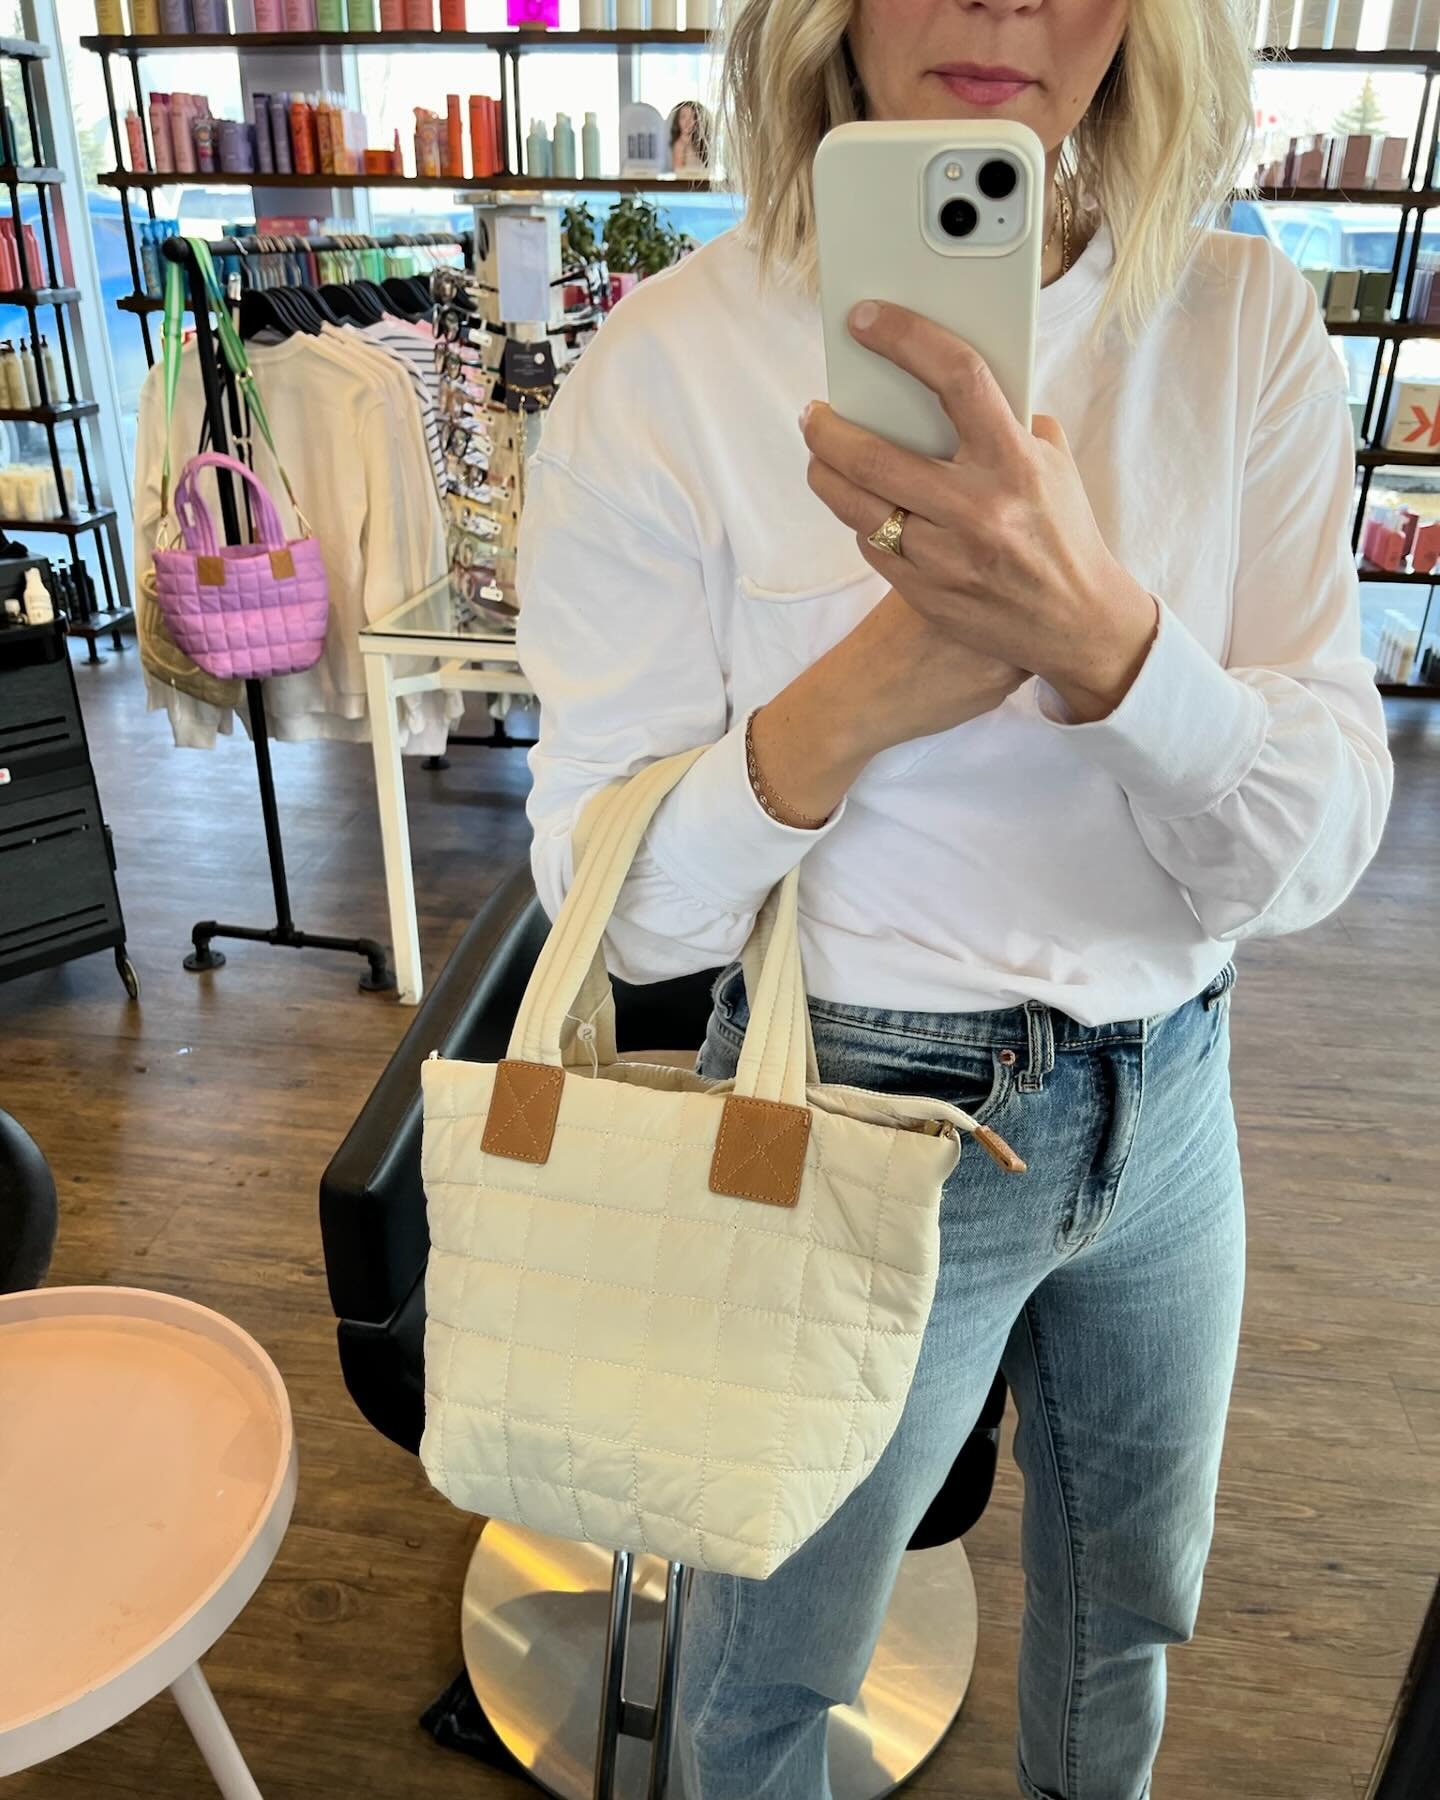 If you&rsquo;ve been into the salon lately, you might have seen these cute quilted tote bags. Available in Ivory and Purple and they come with a fun cross-body strap too!

_____
Copper Lane Hair Studio &bull; Shop Red Deer &bull; Red Deer business &b